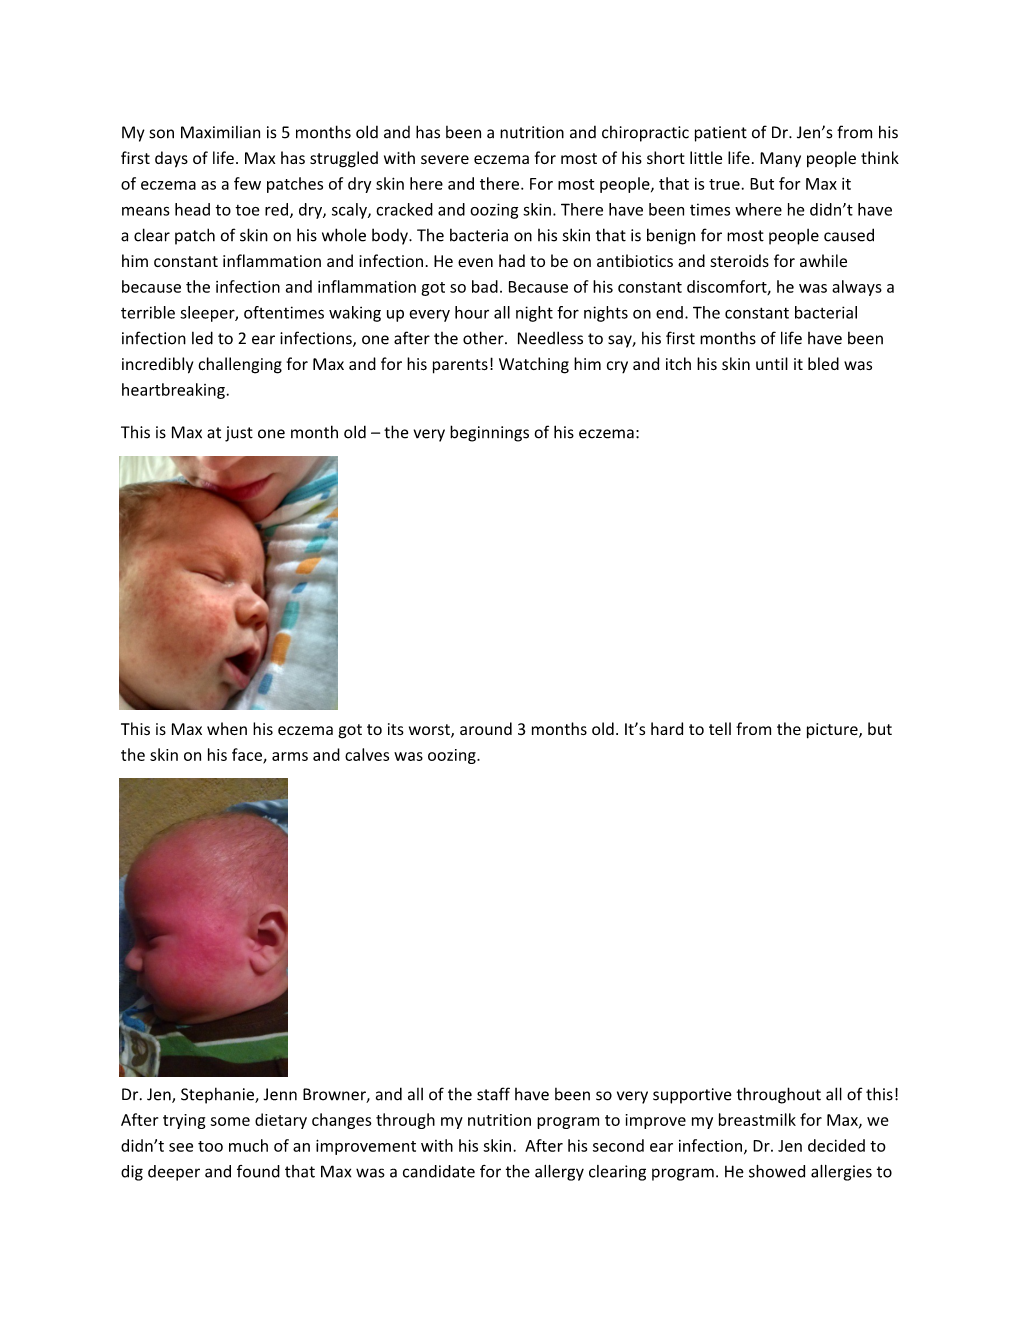 My Son Maximilian Is 5 Months Old and Has Been a Nutrition and Chiropractic Patient Of